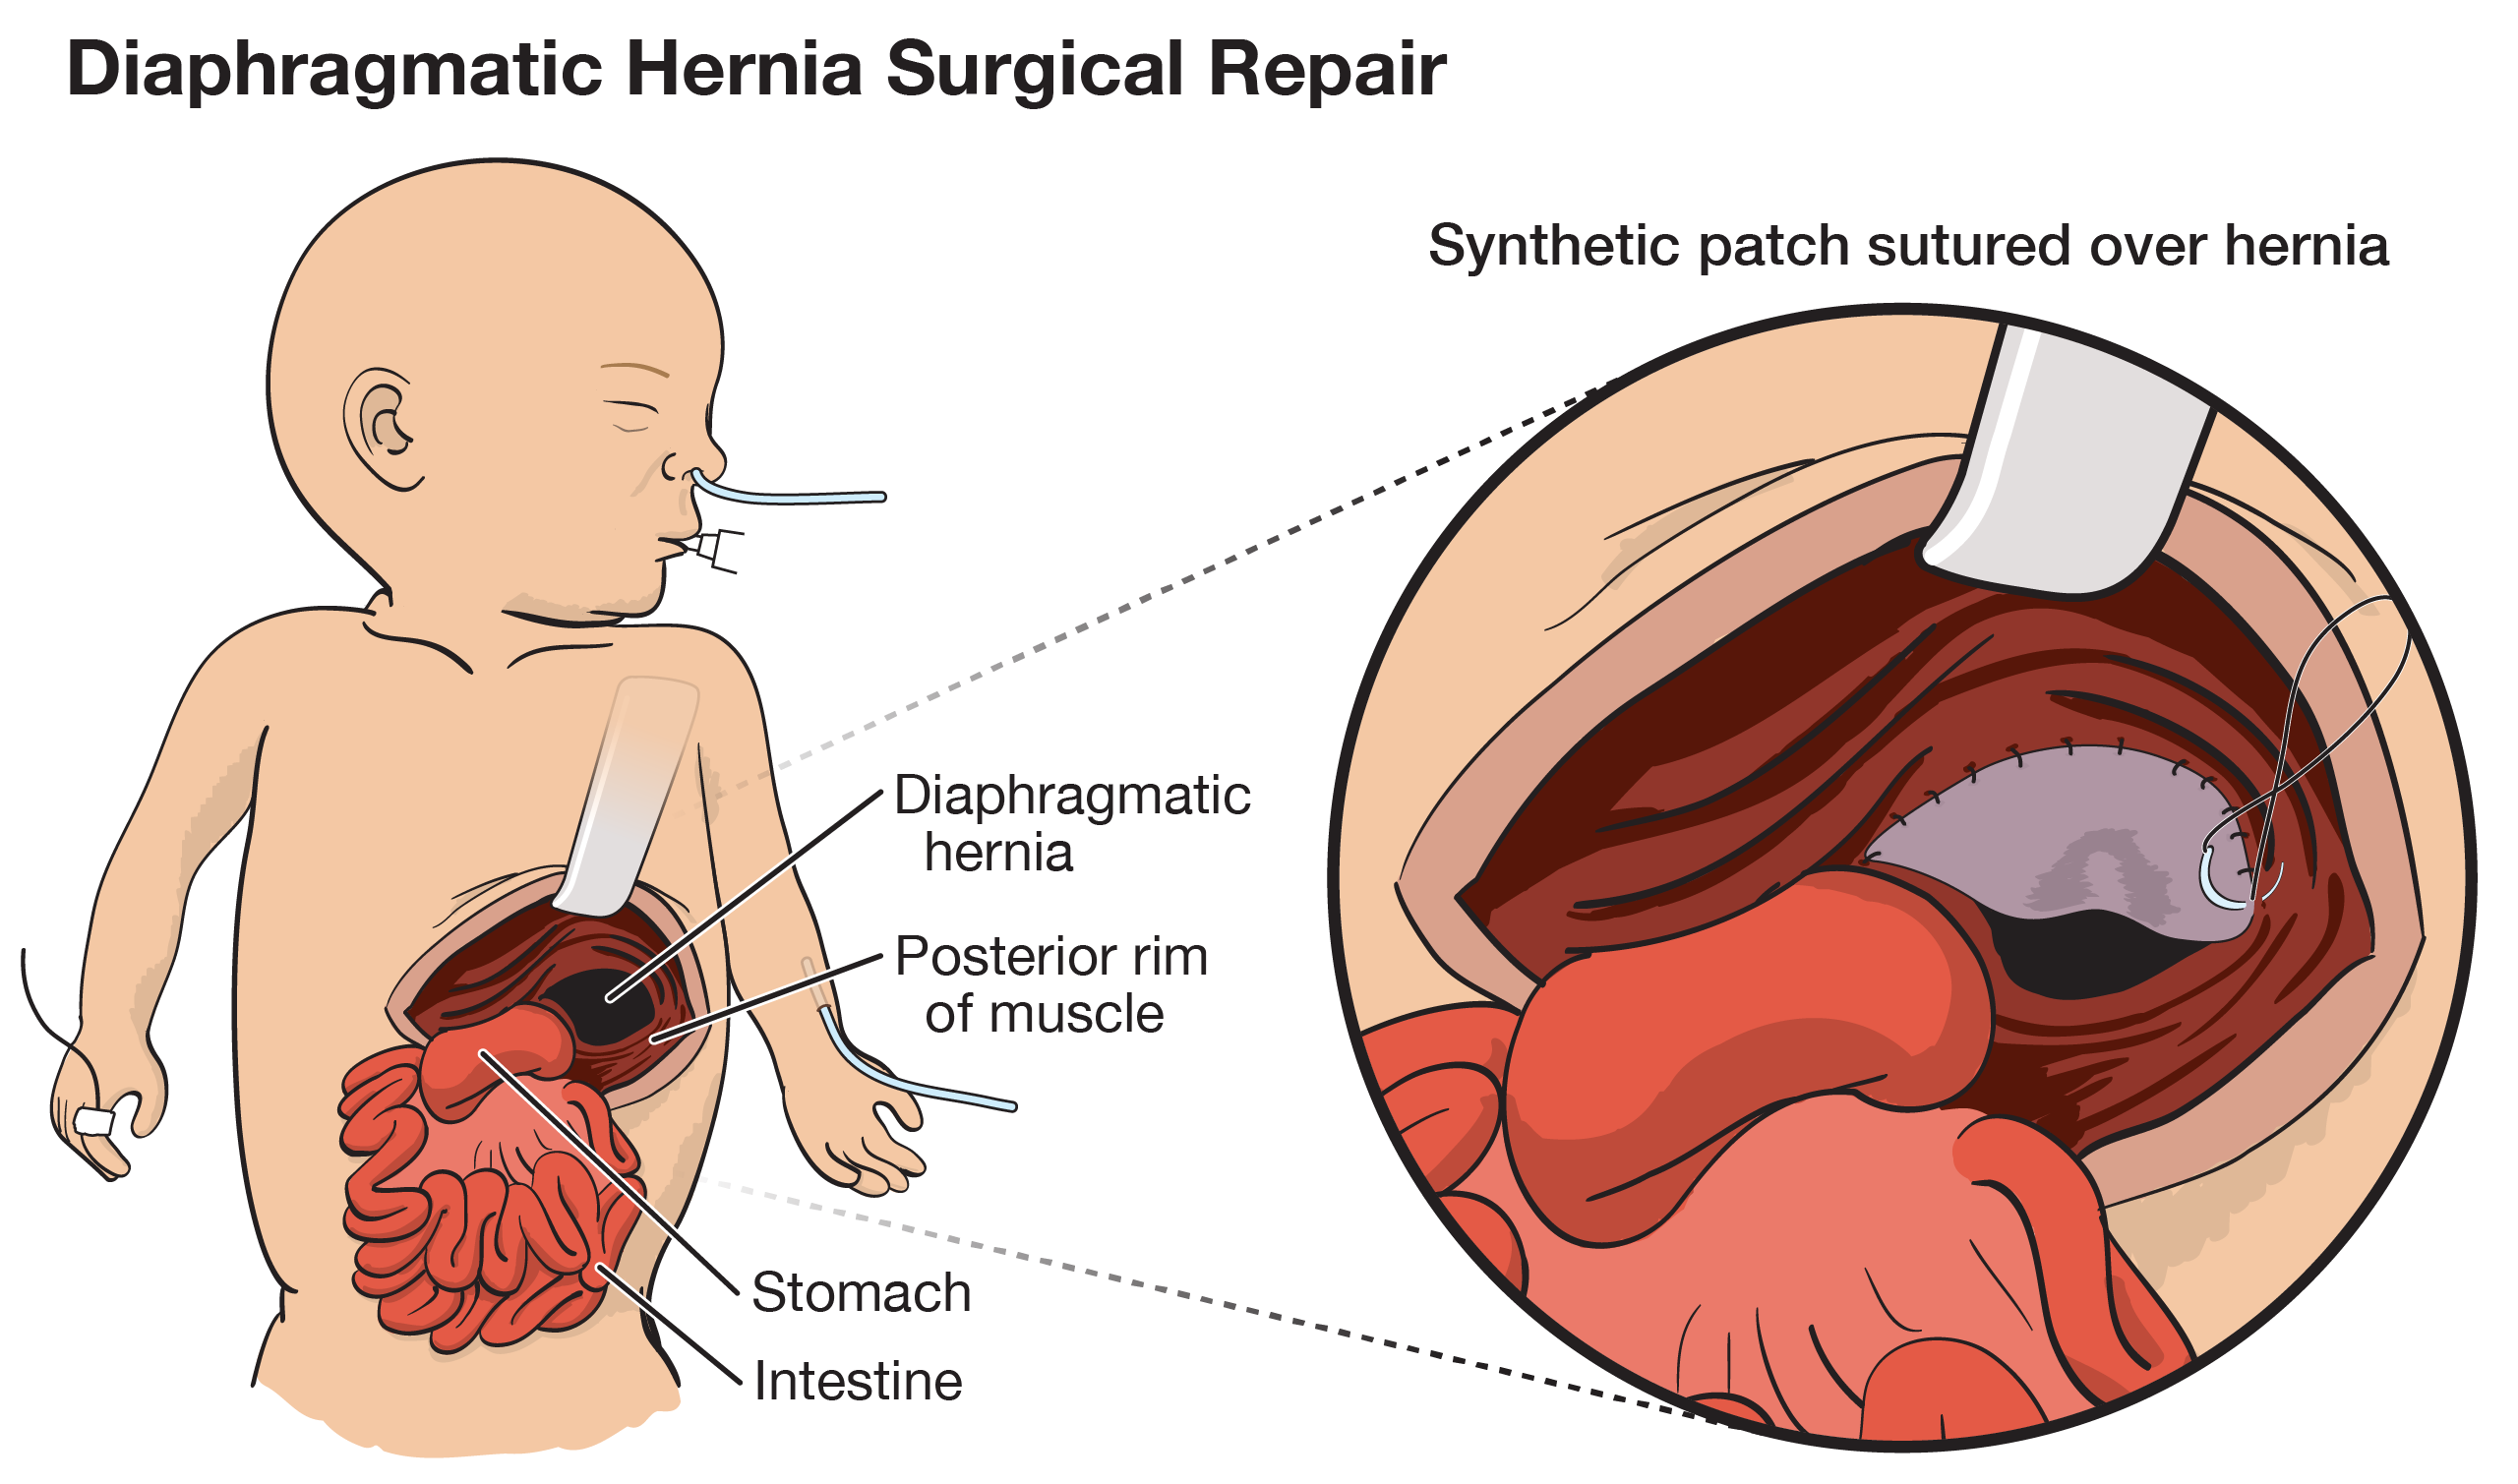 Illustration of diaphragmatic surgical repair using a synthetic patch